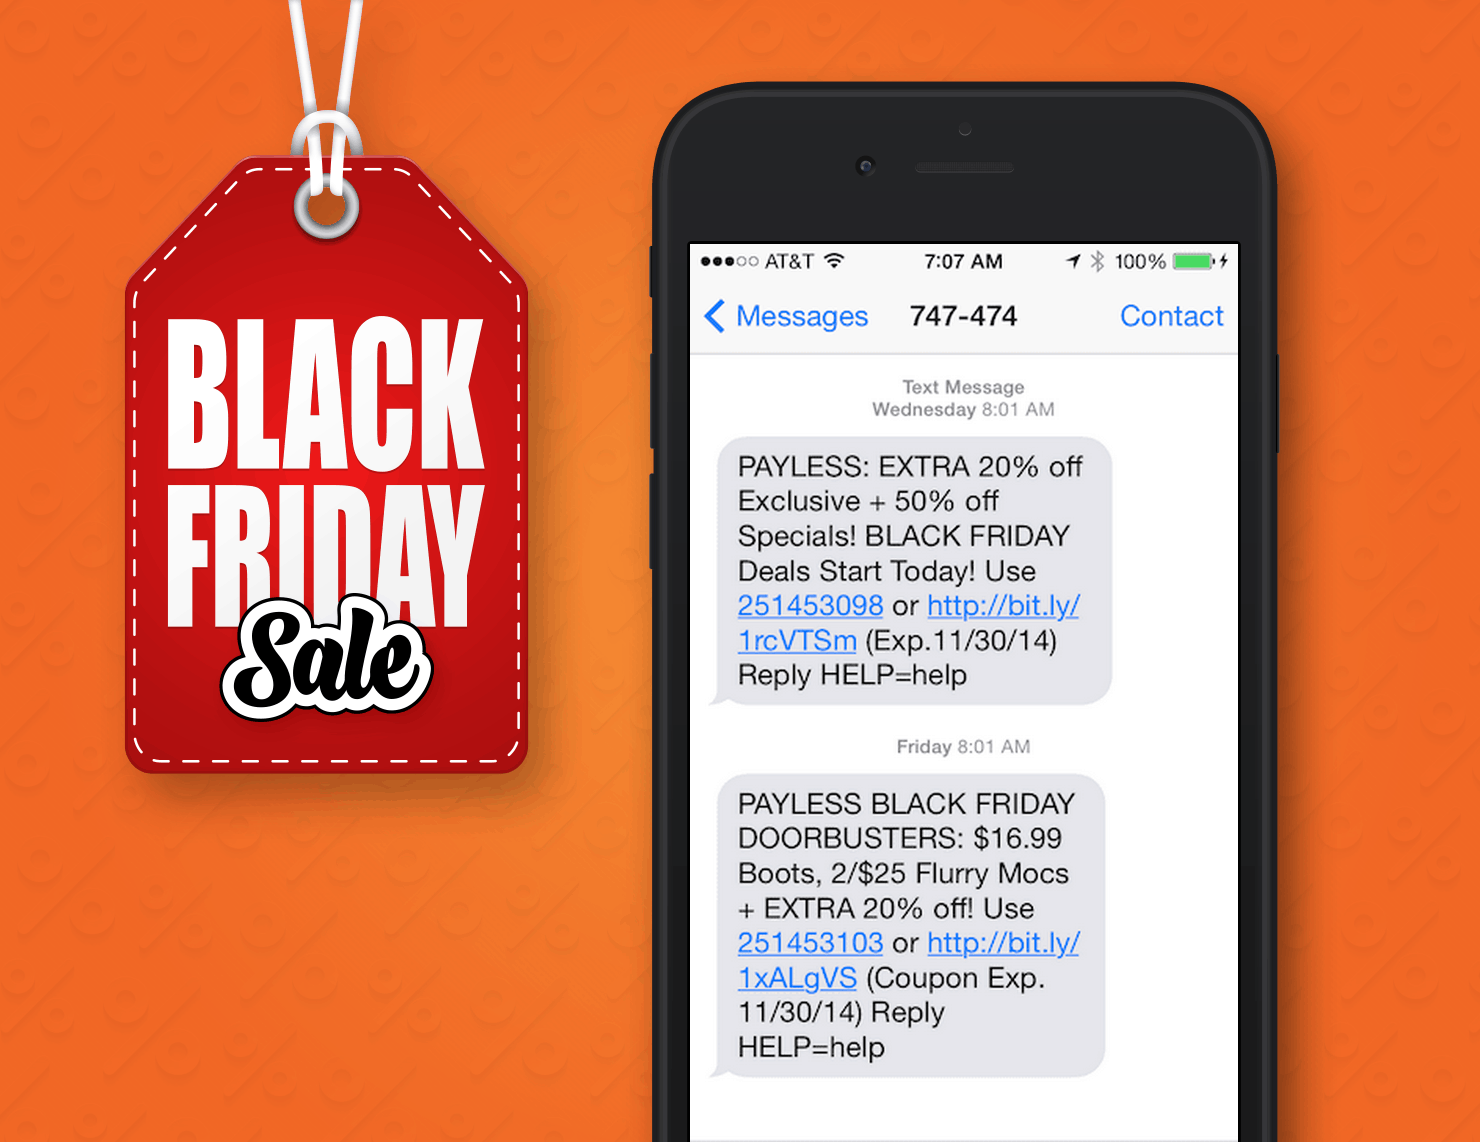 Black Friday SMS Marketing Example From Payless Shoes